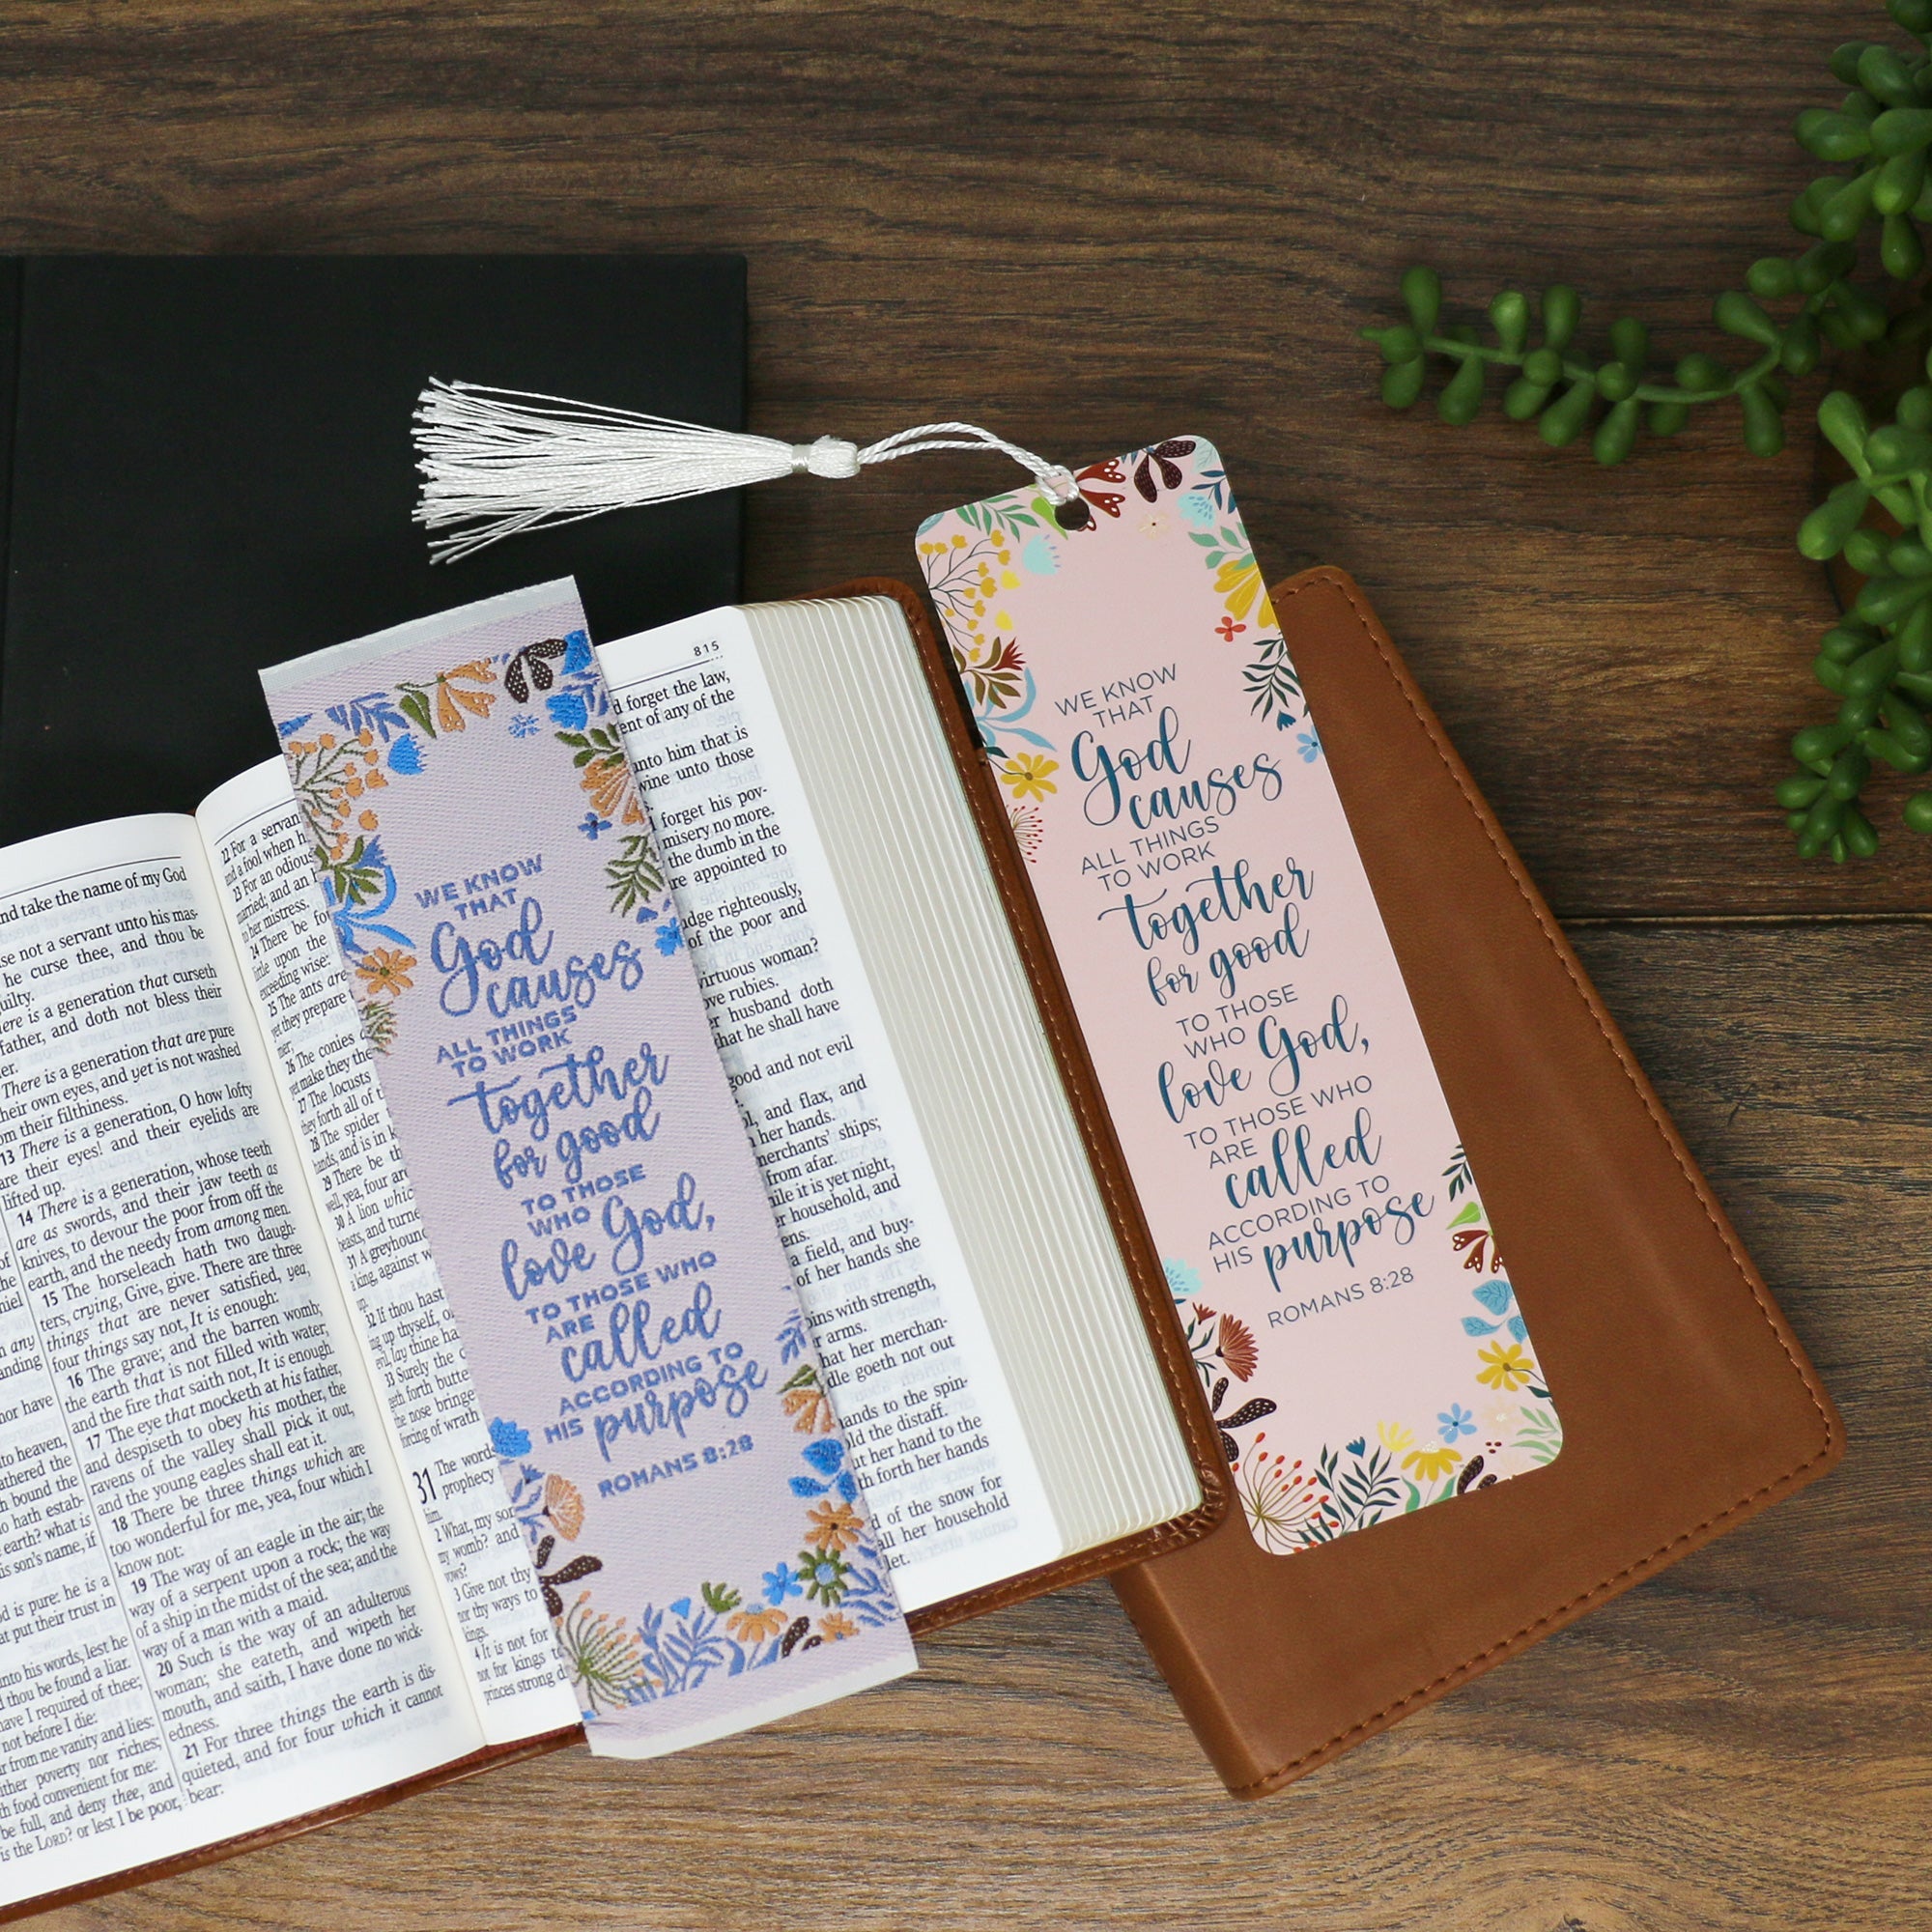 All things together for good - Romans 8:28 Woven and Tasseled Bookmark Set